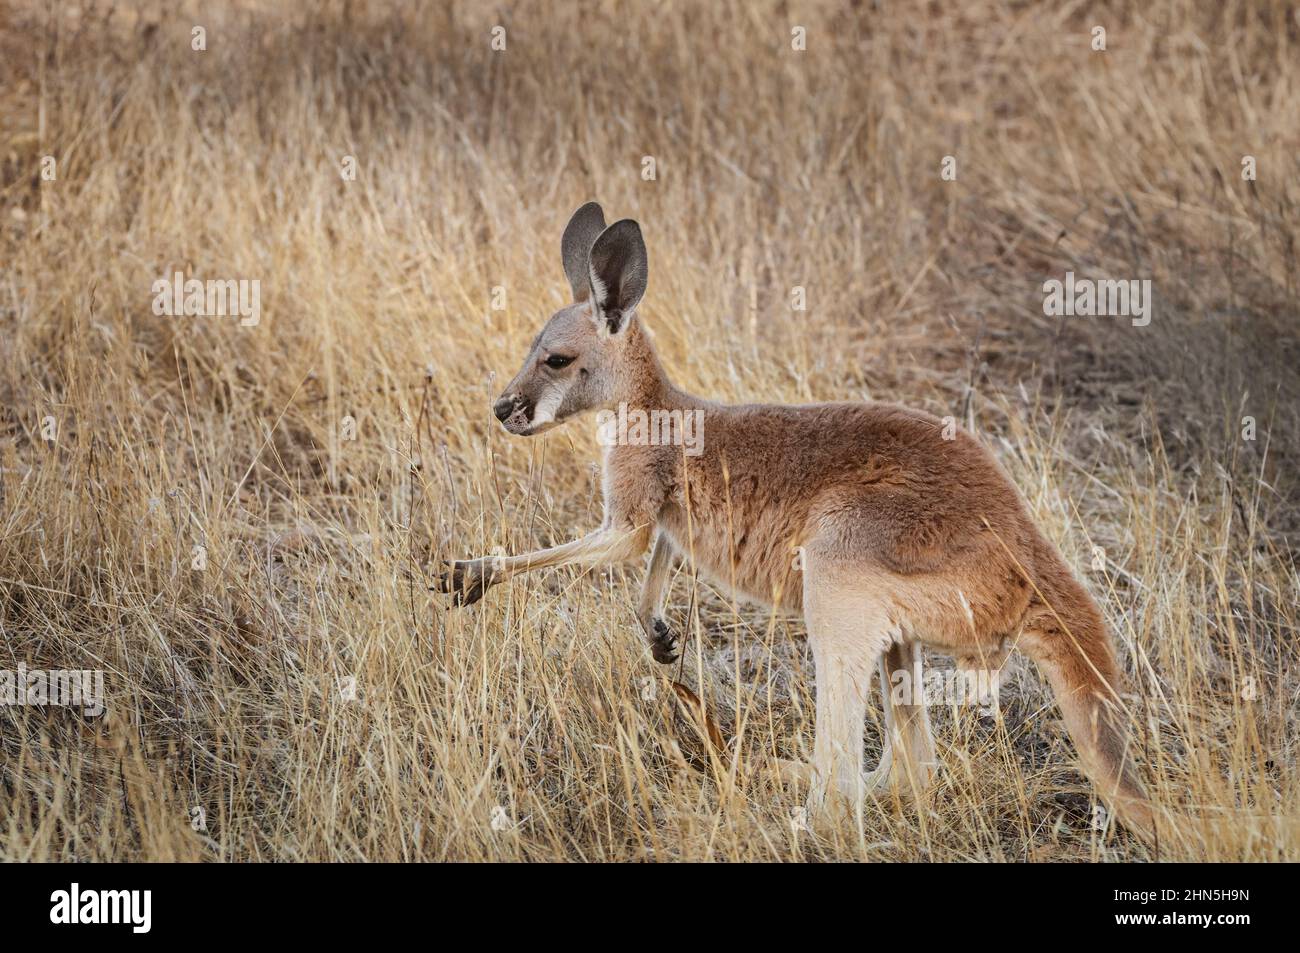 Young Red Kangaroo in dry outback grass. Stock Photo